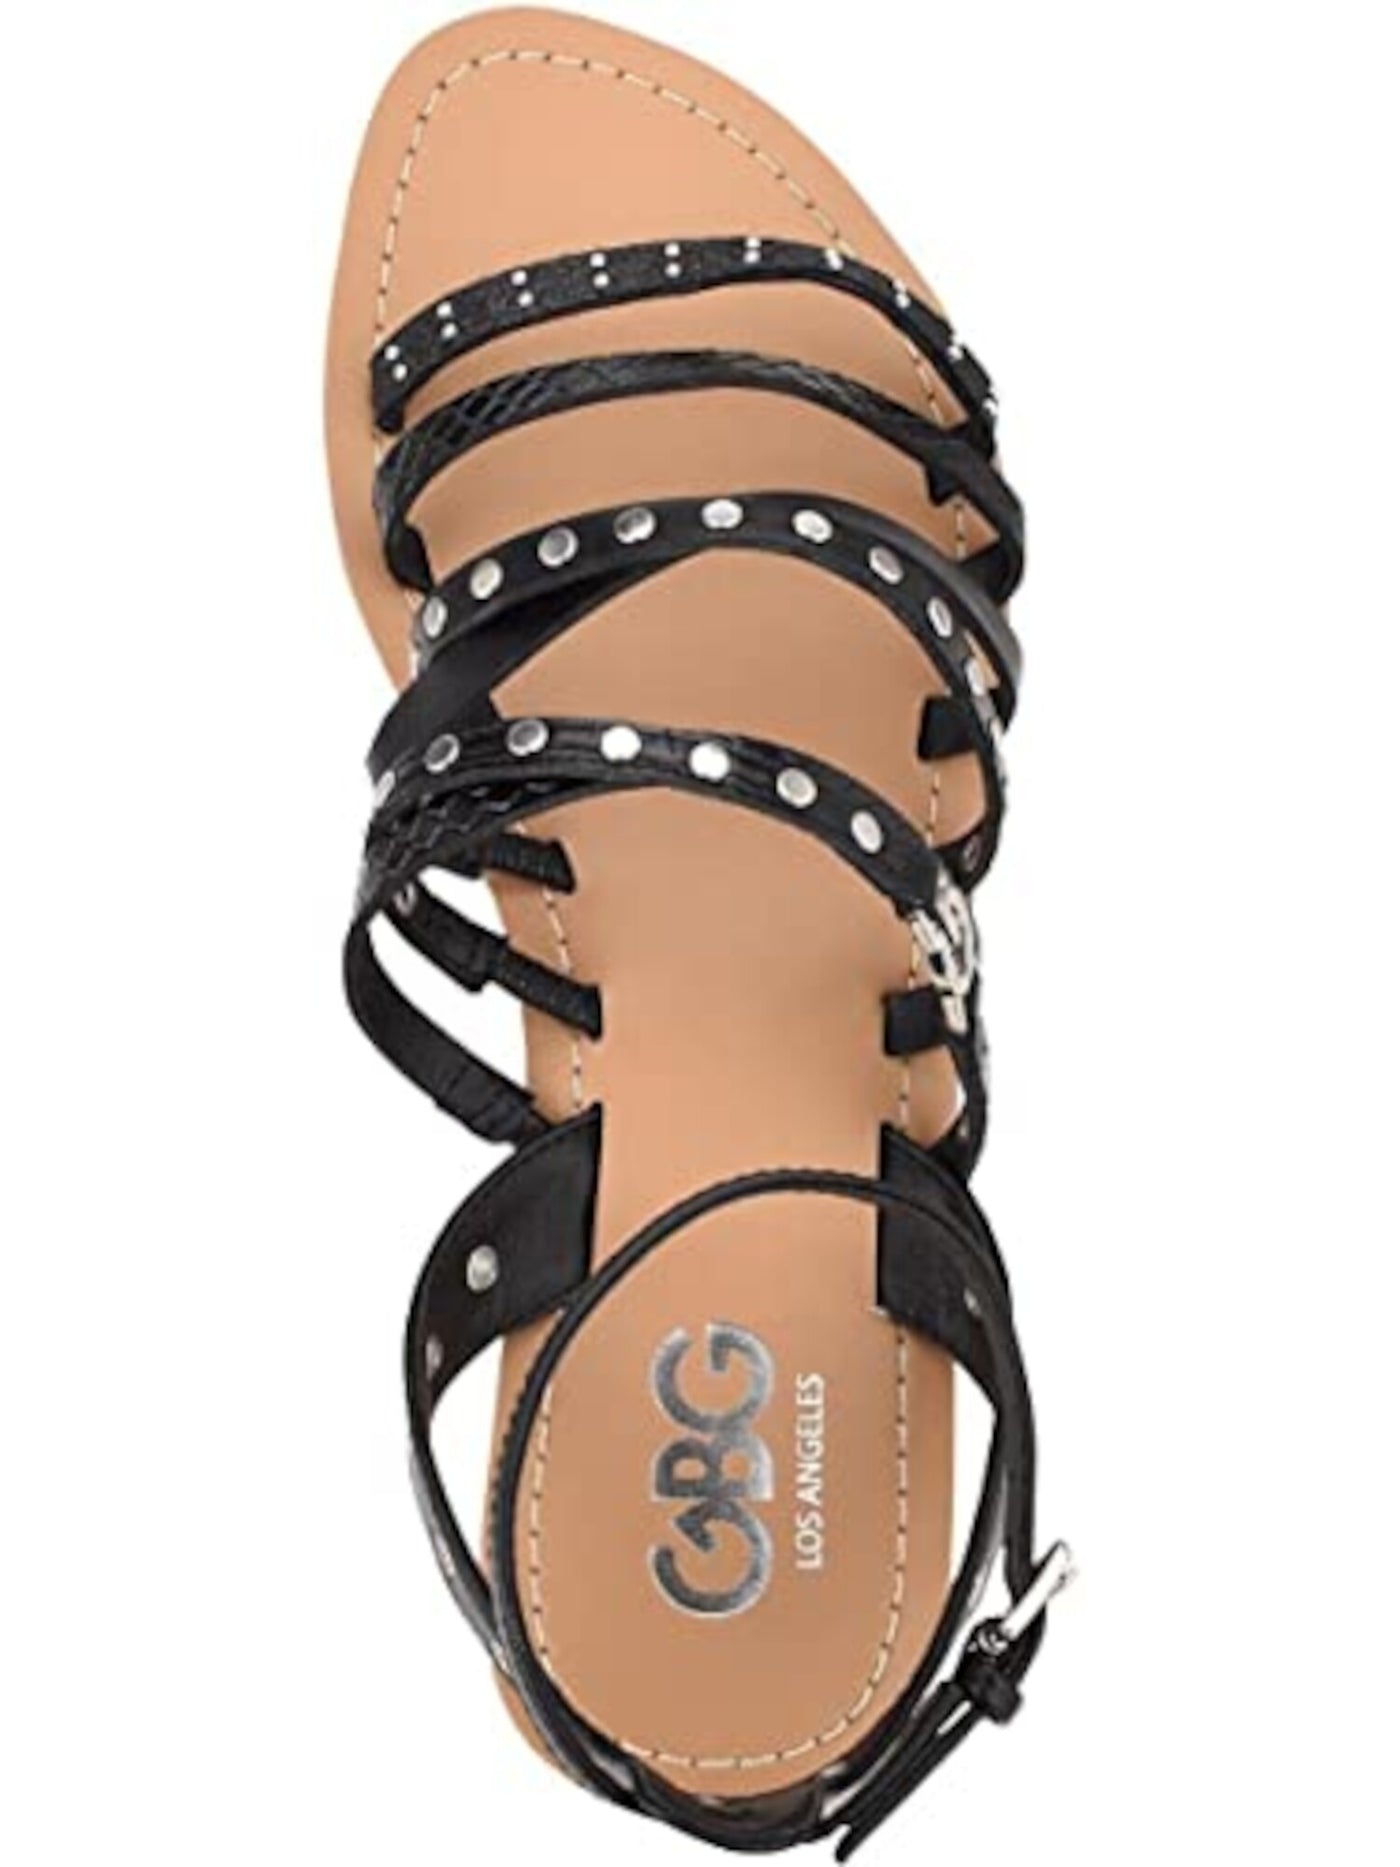 GBG LOS ANGELES Womens Black Adjustable Strap G-Logo Studded Strappy Hoko Round Toe Buckle Sandals Shoes 5.5 M